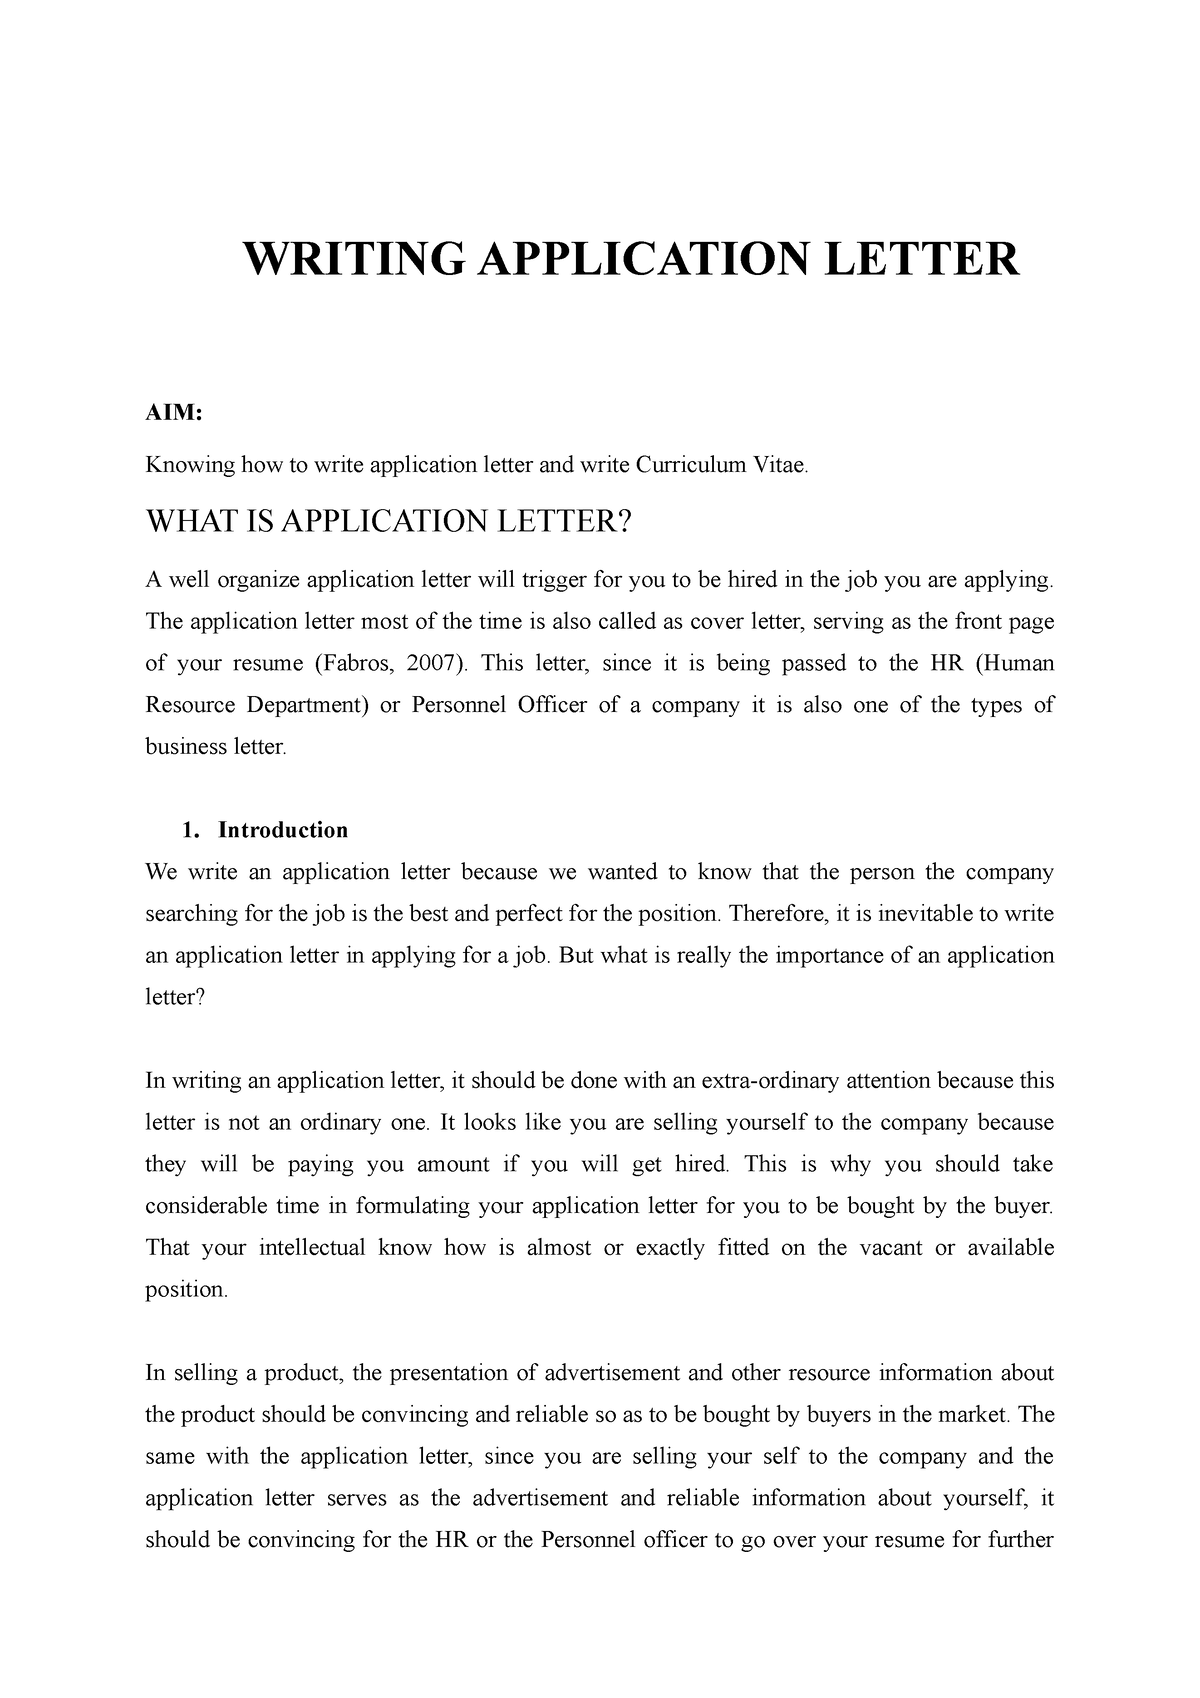 guidelines in writing application letter